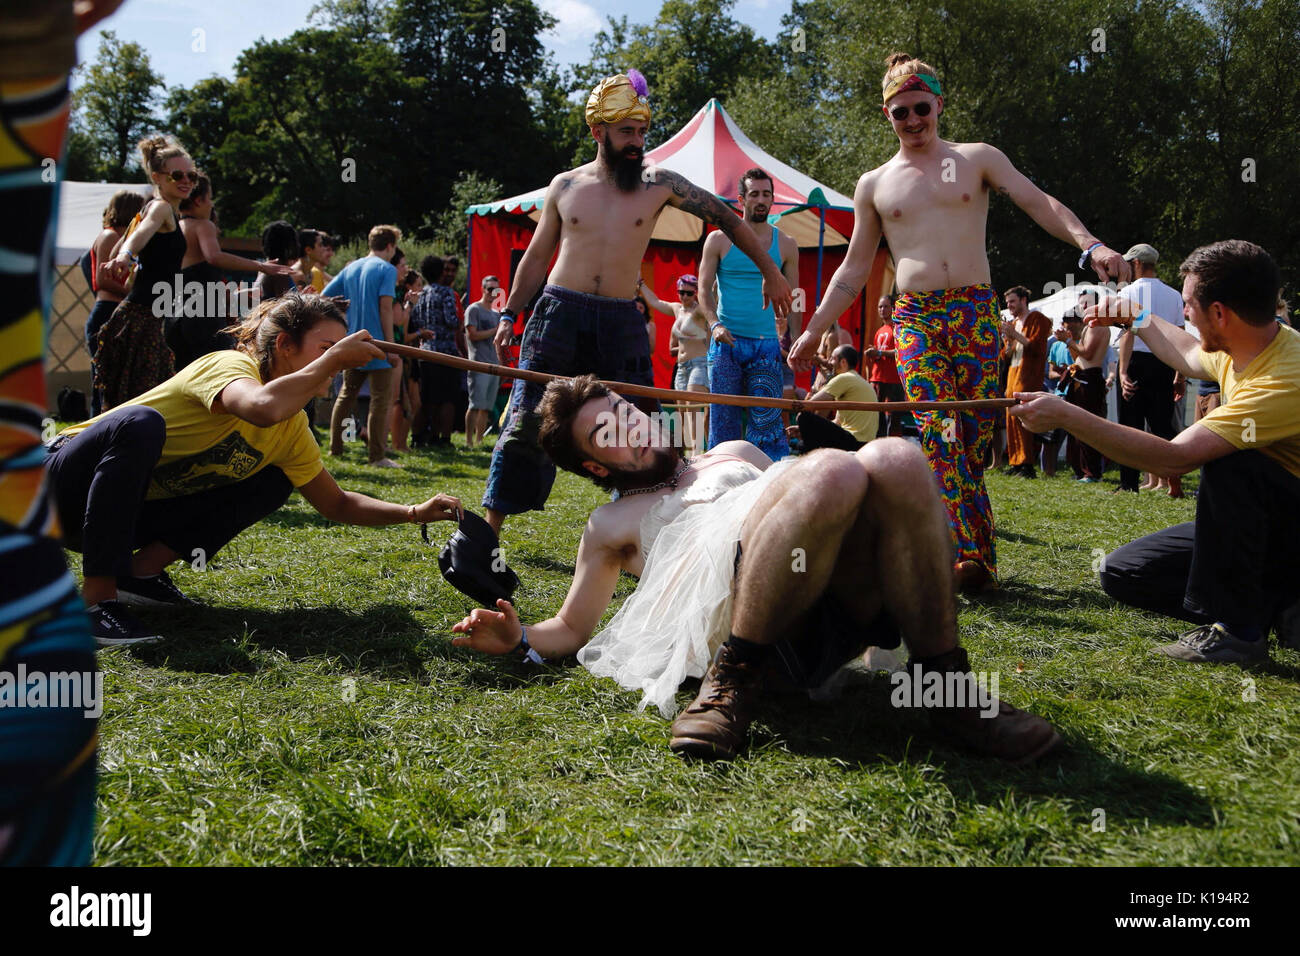 Northampton, UK. 25th Aug, 2017. Shambala festival, Northampton officially kicks off today with an early morning limbo and capoeira workshop under sunny skies. Festival goers shake off last nights hangovers and attempt cartwheels, dancing and singing in the Kelmarsh Estate. Credit: Wayne Farrell/Alamy Live News Stock Photo